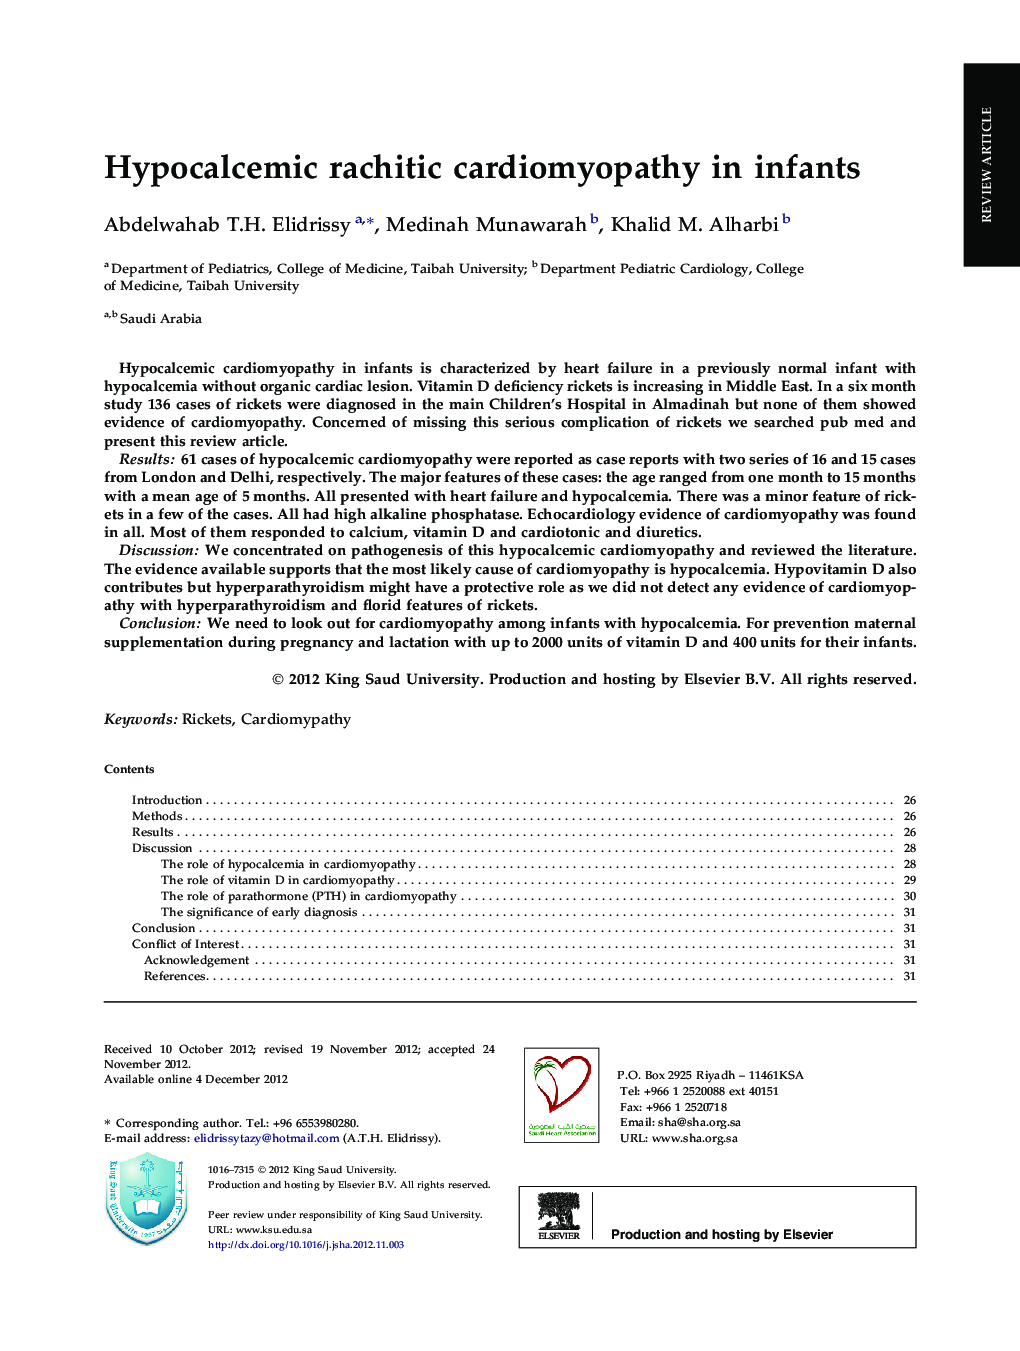 Hypocalcemic rachitic cardiomyopathy in infants 